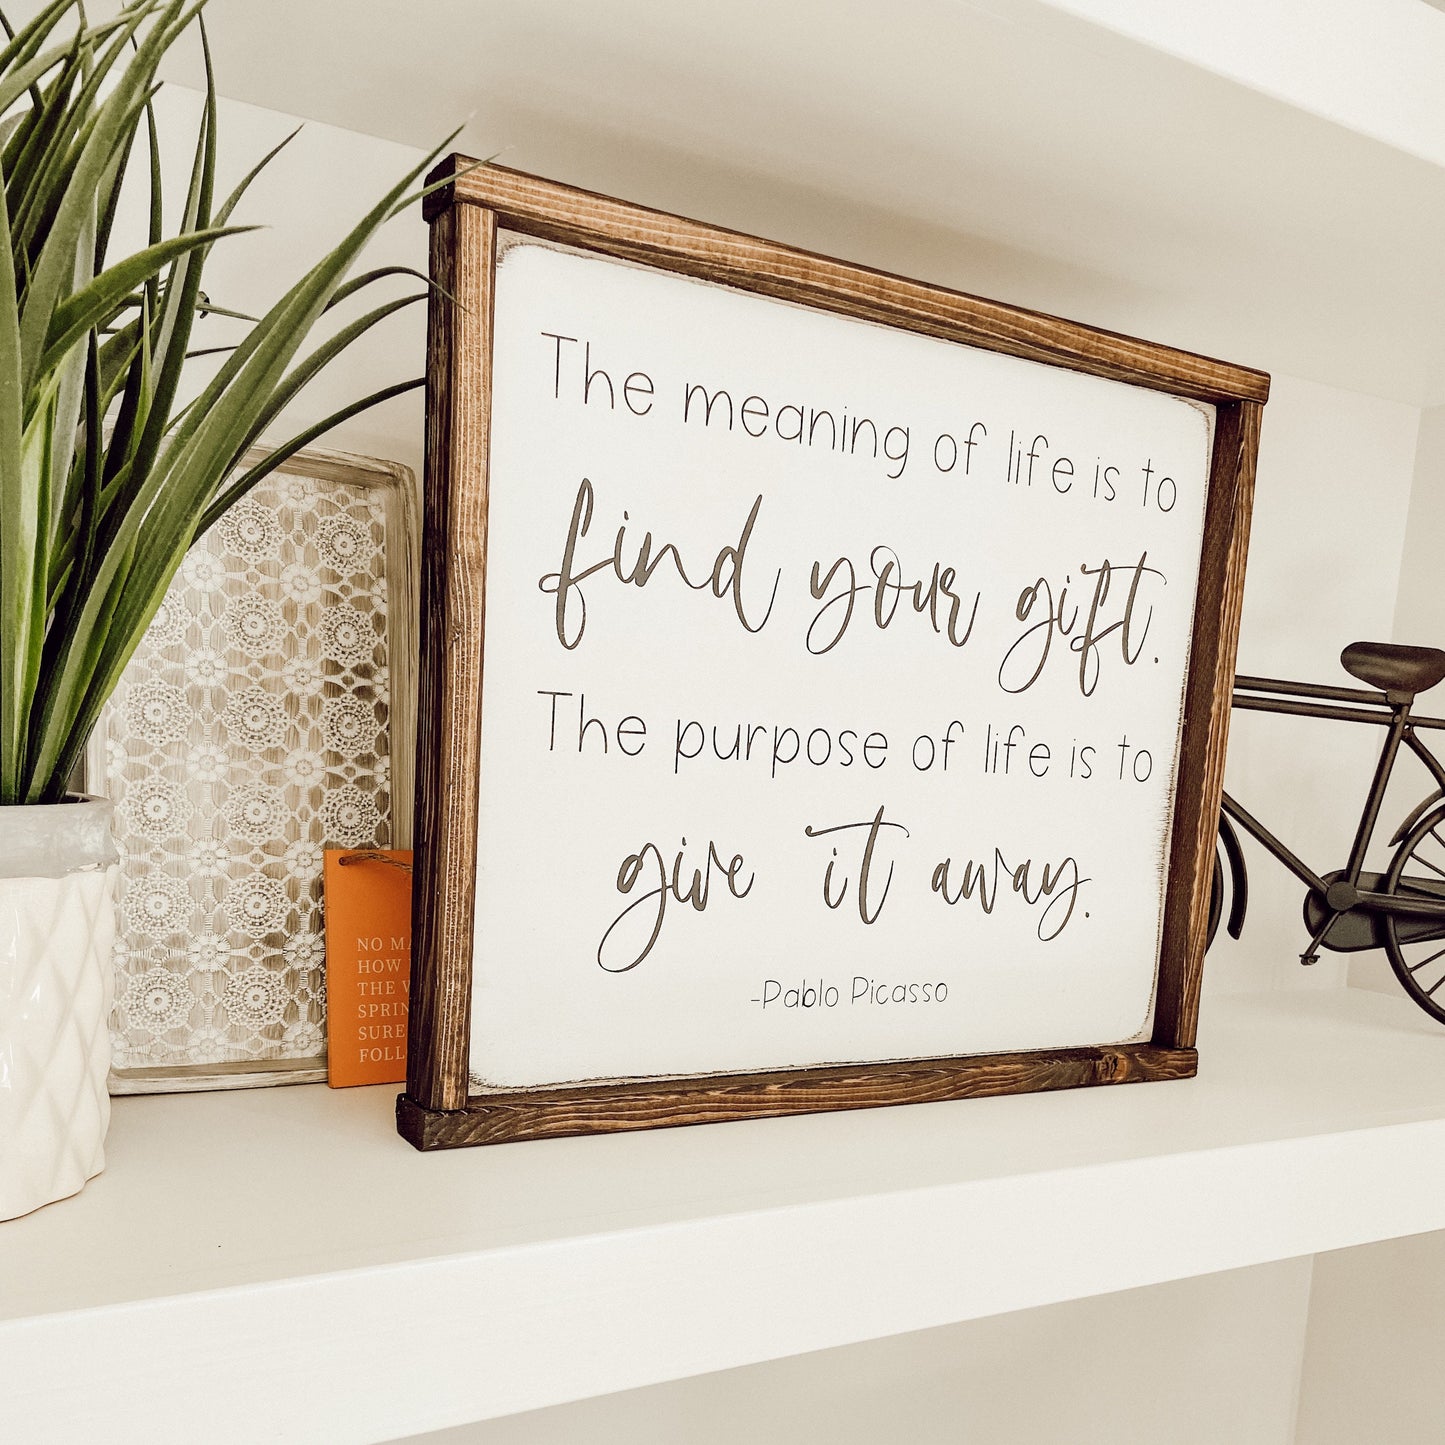 the purpose of life [FREE SHIPPING!]